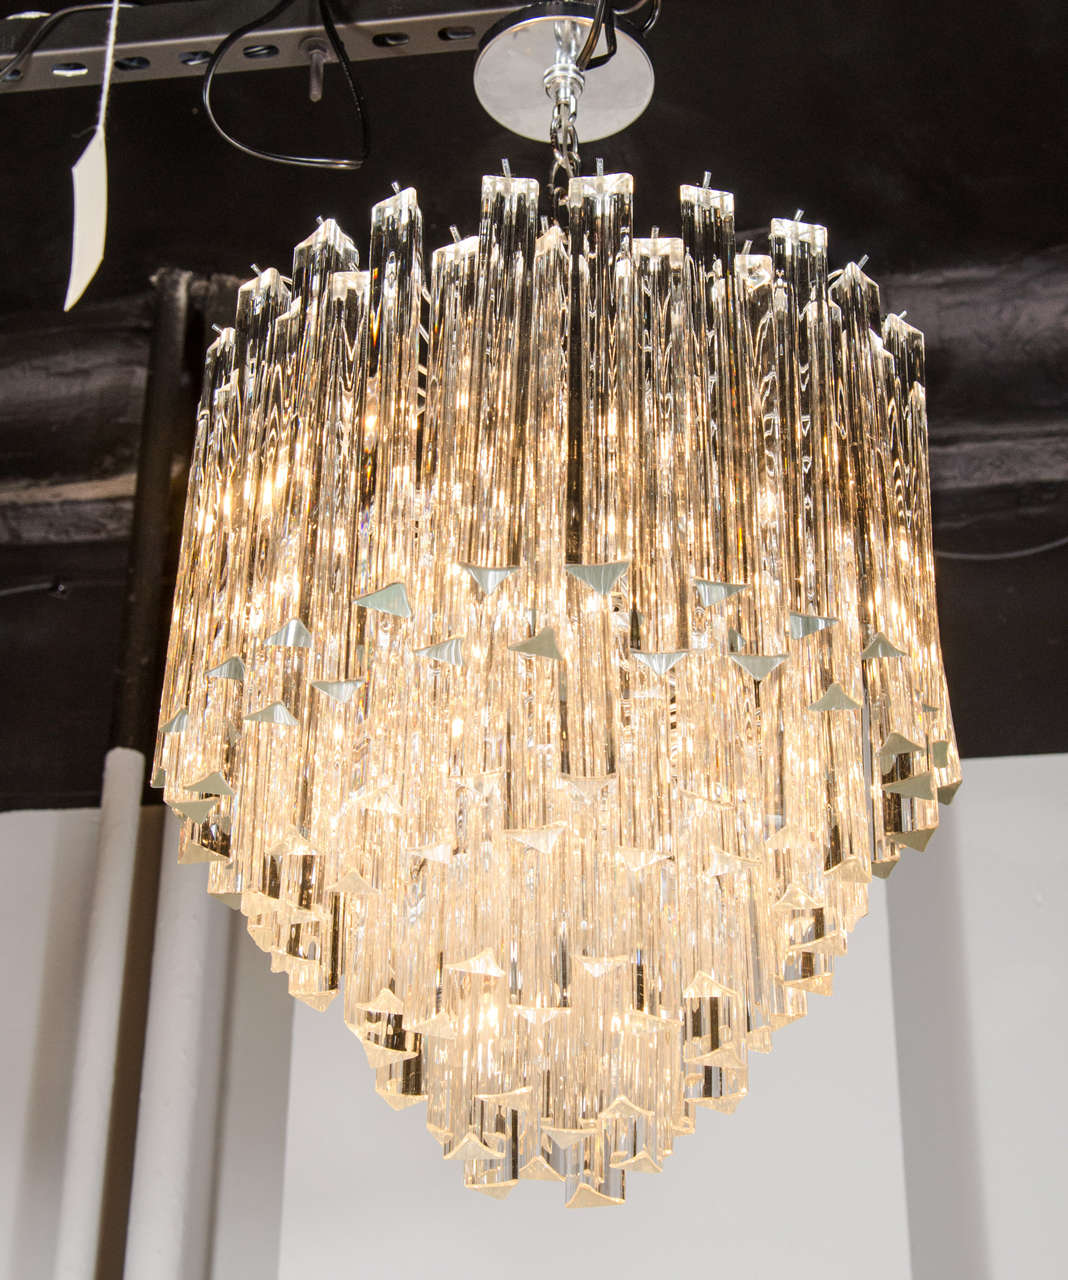 This exceptional Mid-Century Modernist Camer chandelier features individually handblown Murano glass triedre prisms that hang from its chrome frame in a cascading effect. The high quality glass reflects the light beautifully for added dimension and